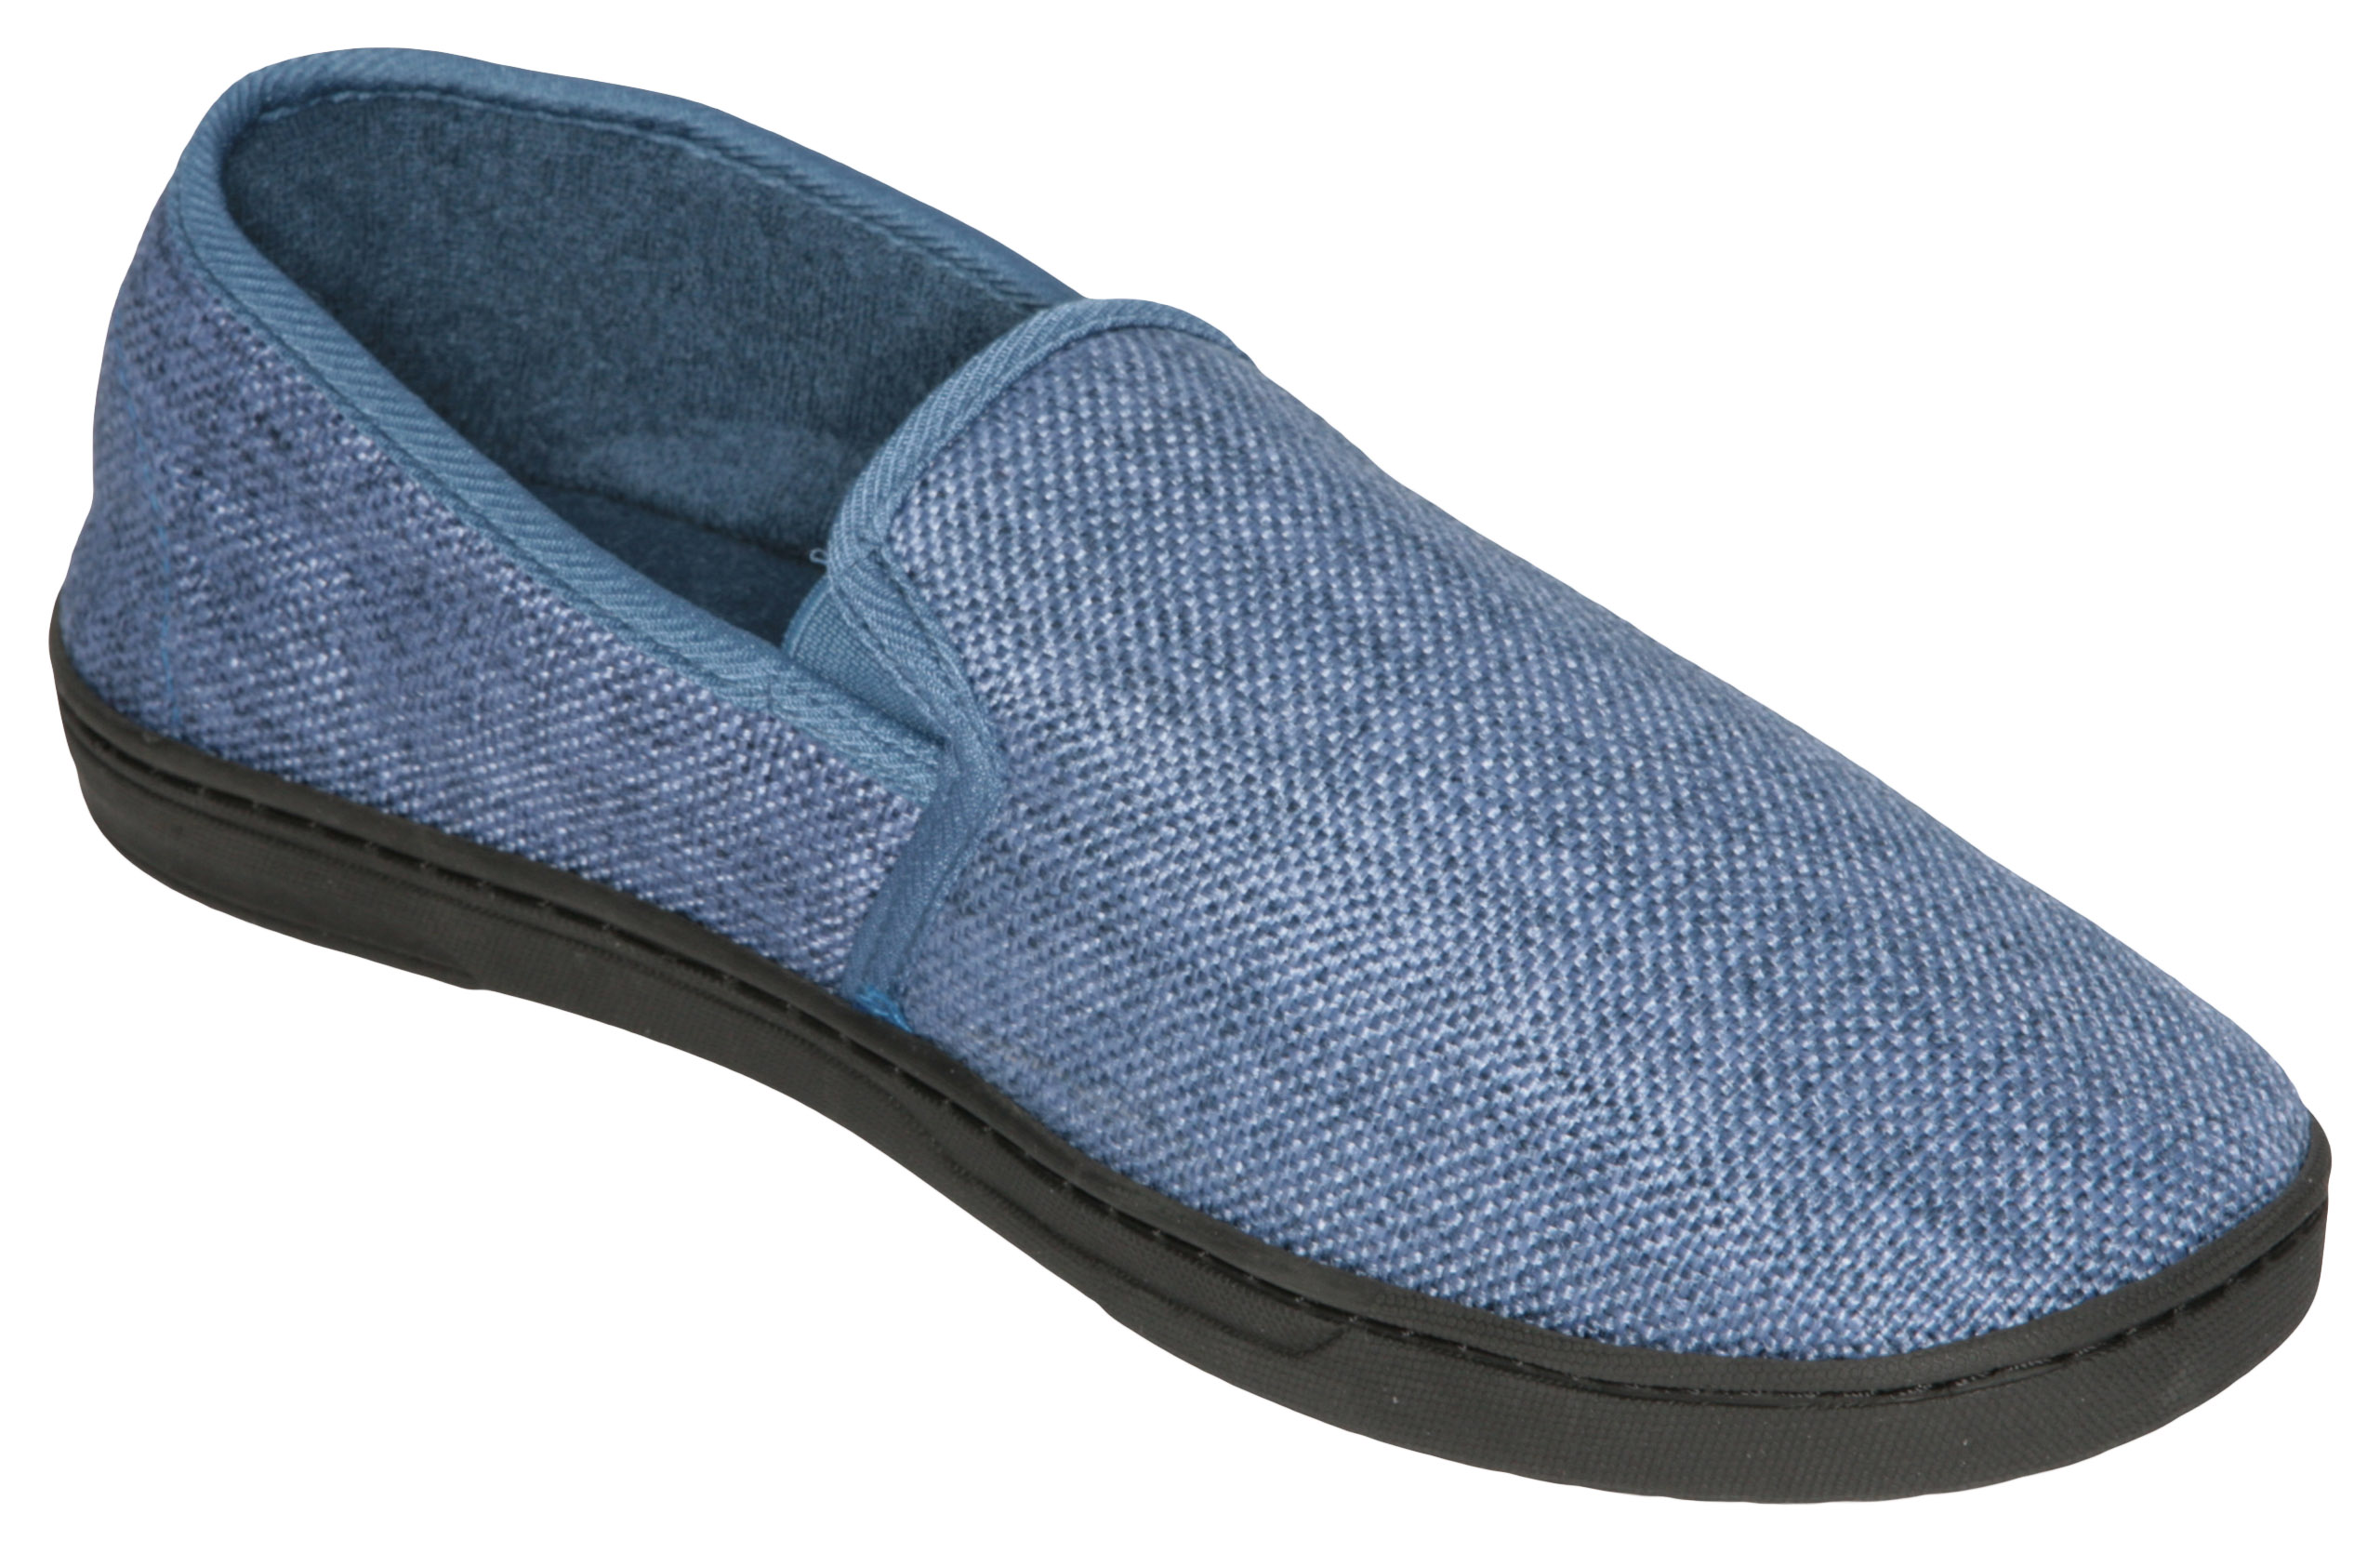 Deluxe Comfort Men's Memory Foam Slipper, Size 9-10 – Soft Linen 120D SBR Insole and Rubber Outsole – Pure Suede Shoes – Non-Marking Sole – Men's Slippers, Blue - image 1 of 5